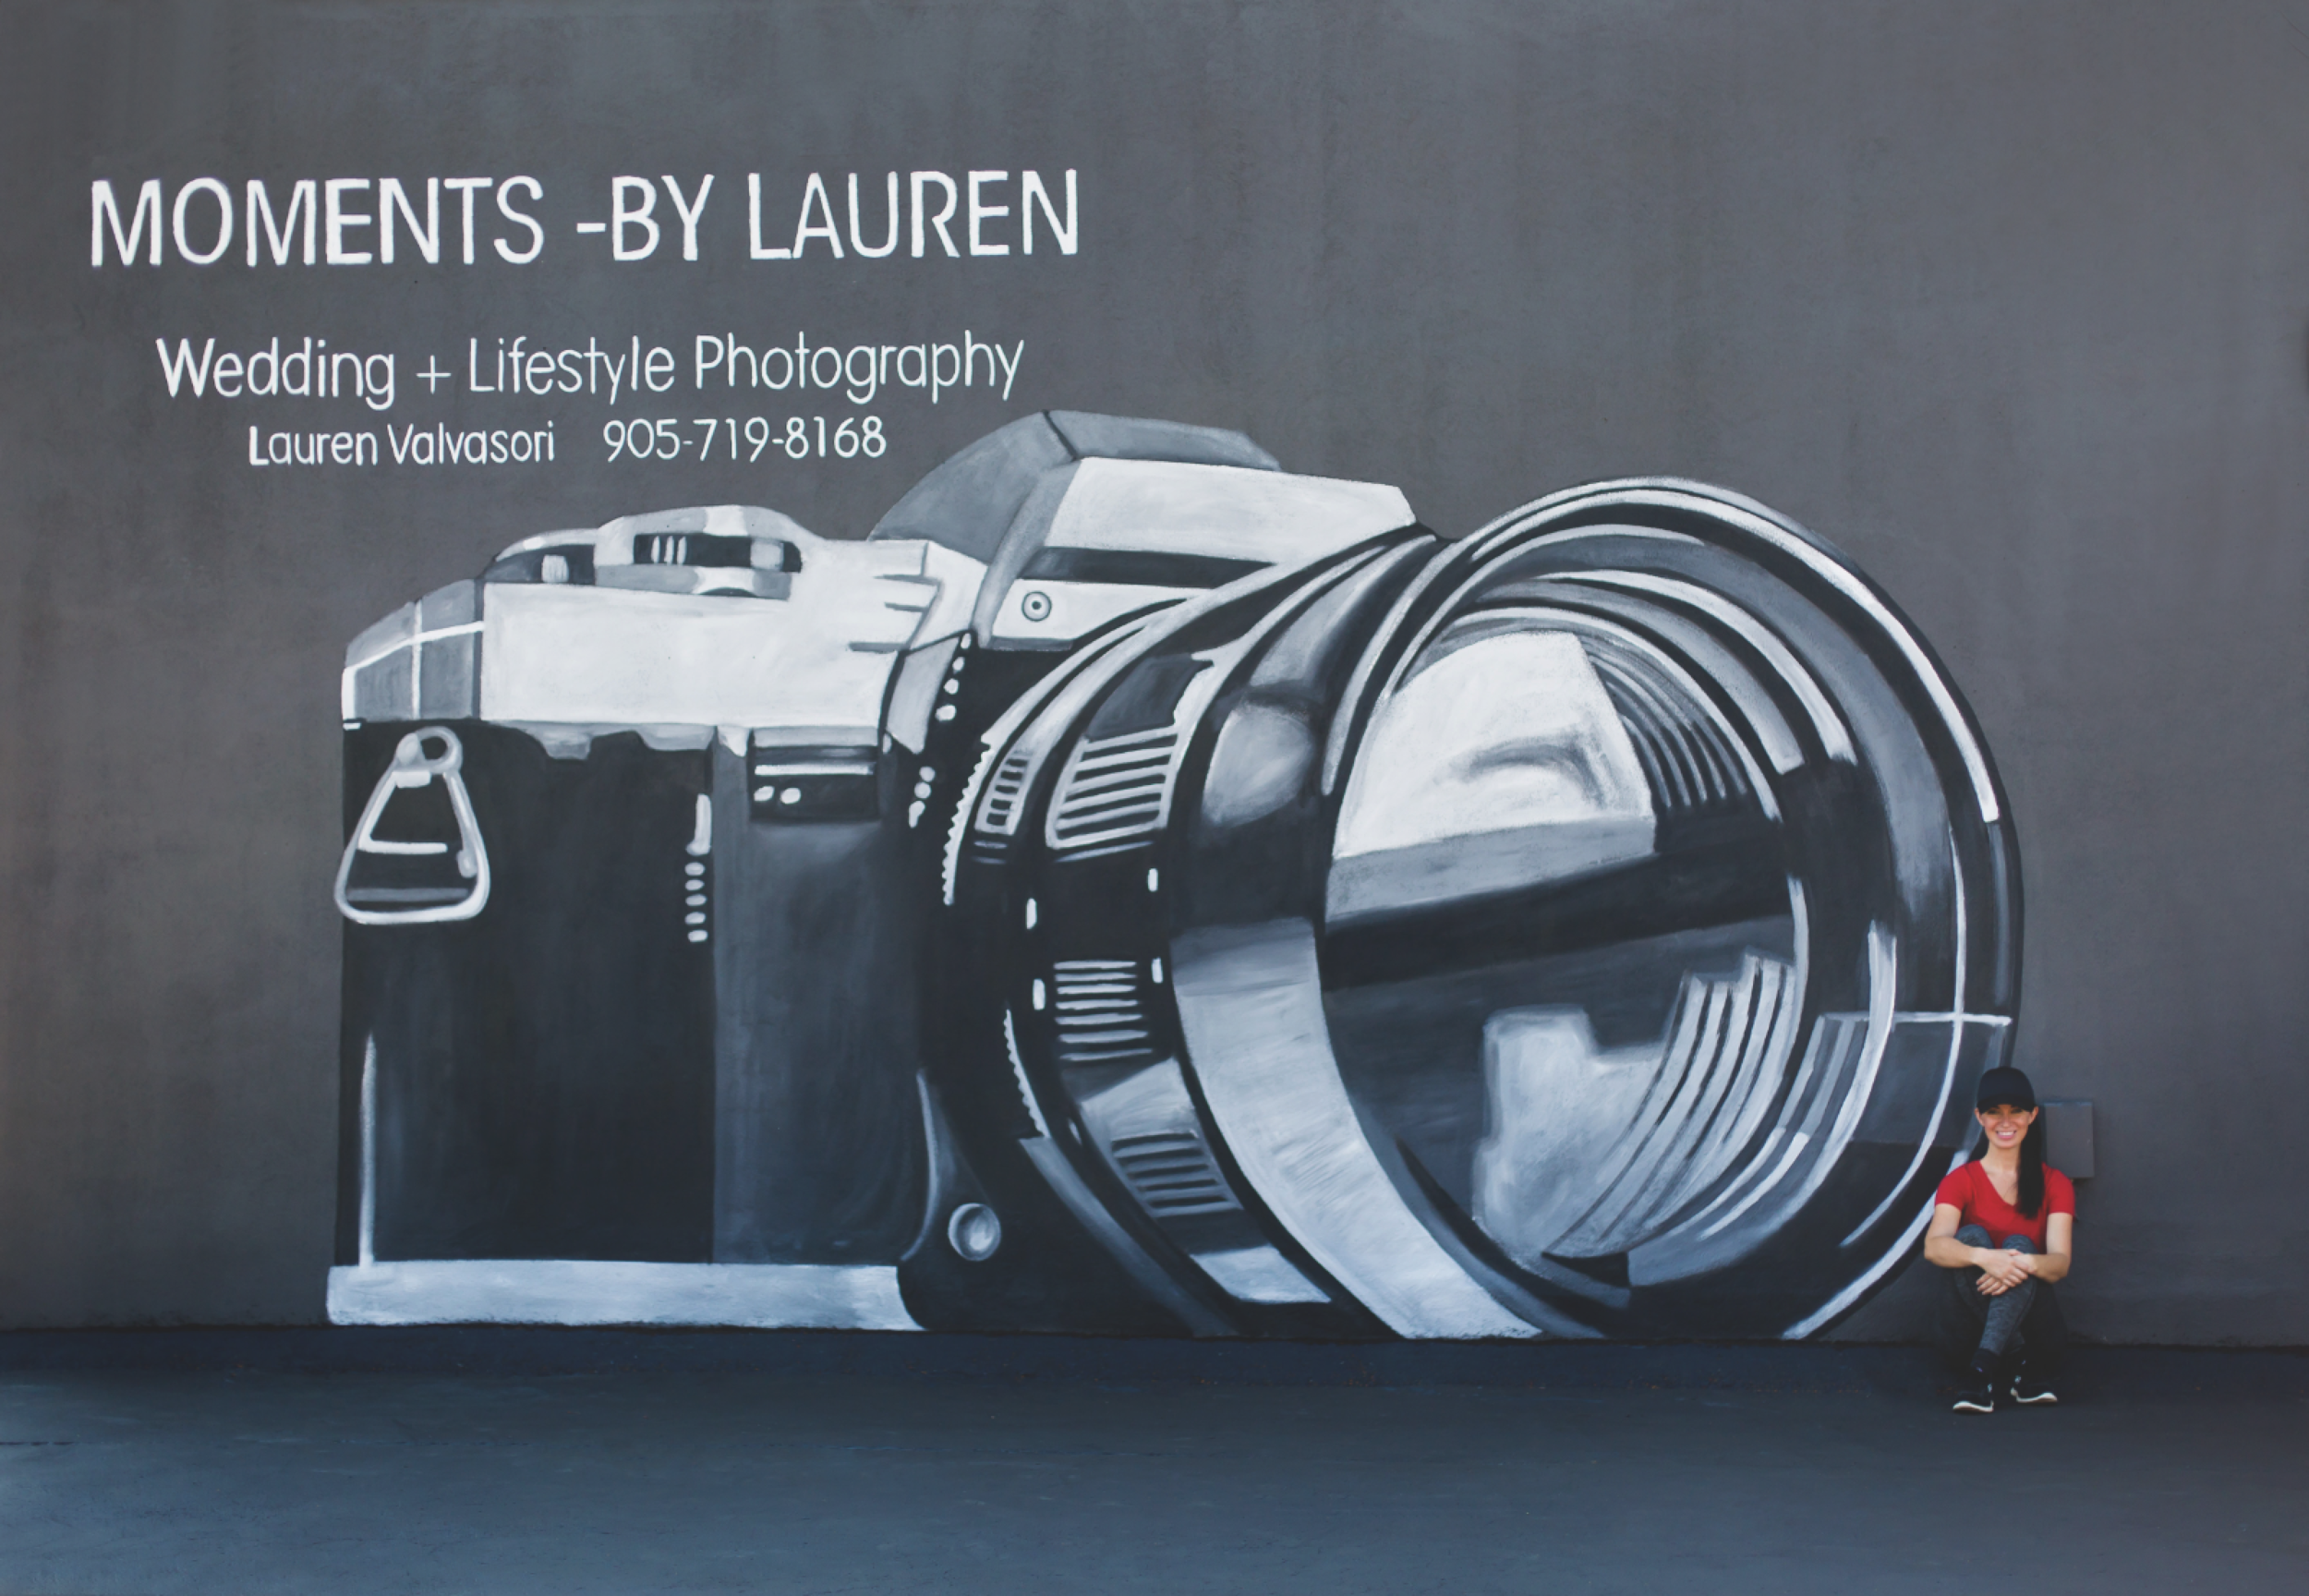 Moments-by-Lauren-Camera-Mural-Claire-Hall-Design-Photo-8-2.png